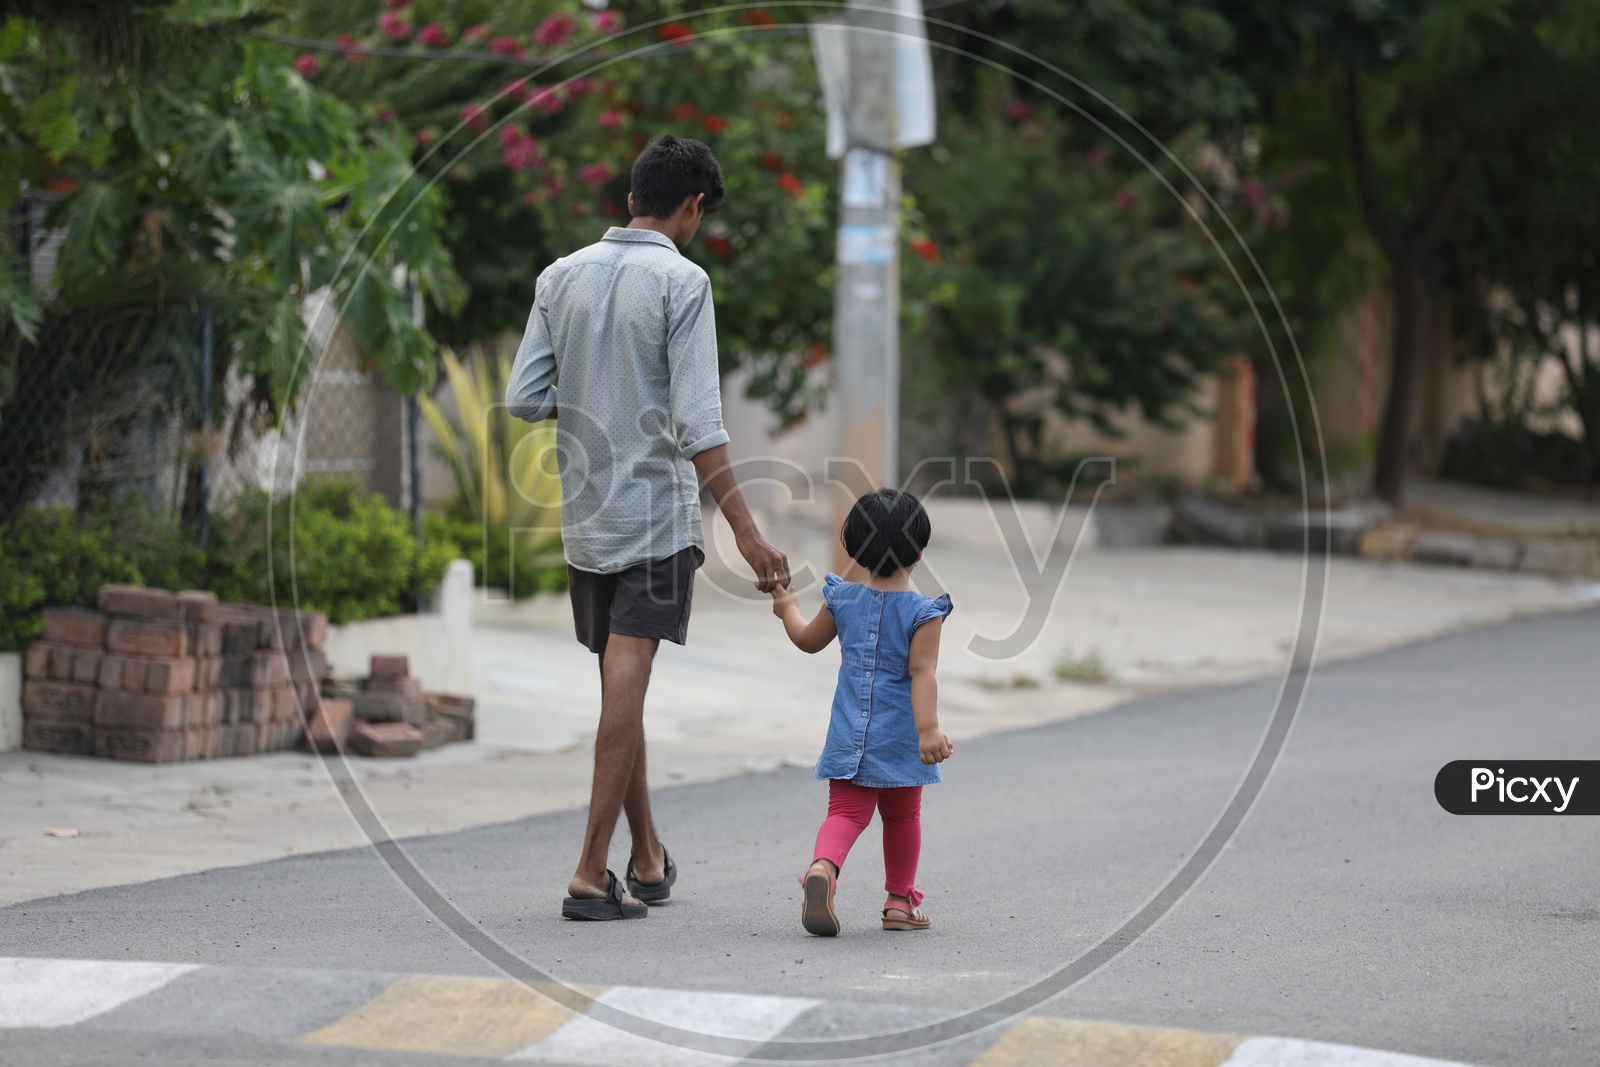 A Brother Walking With  His Sister Or Girl Child  On Roads